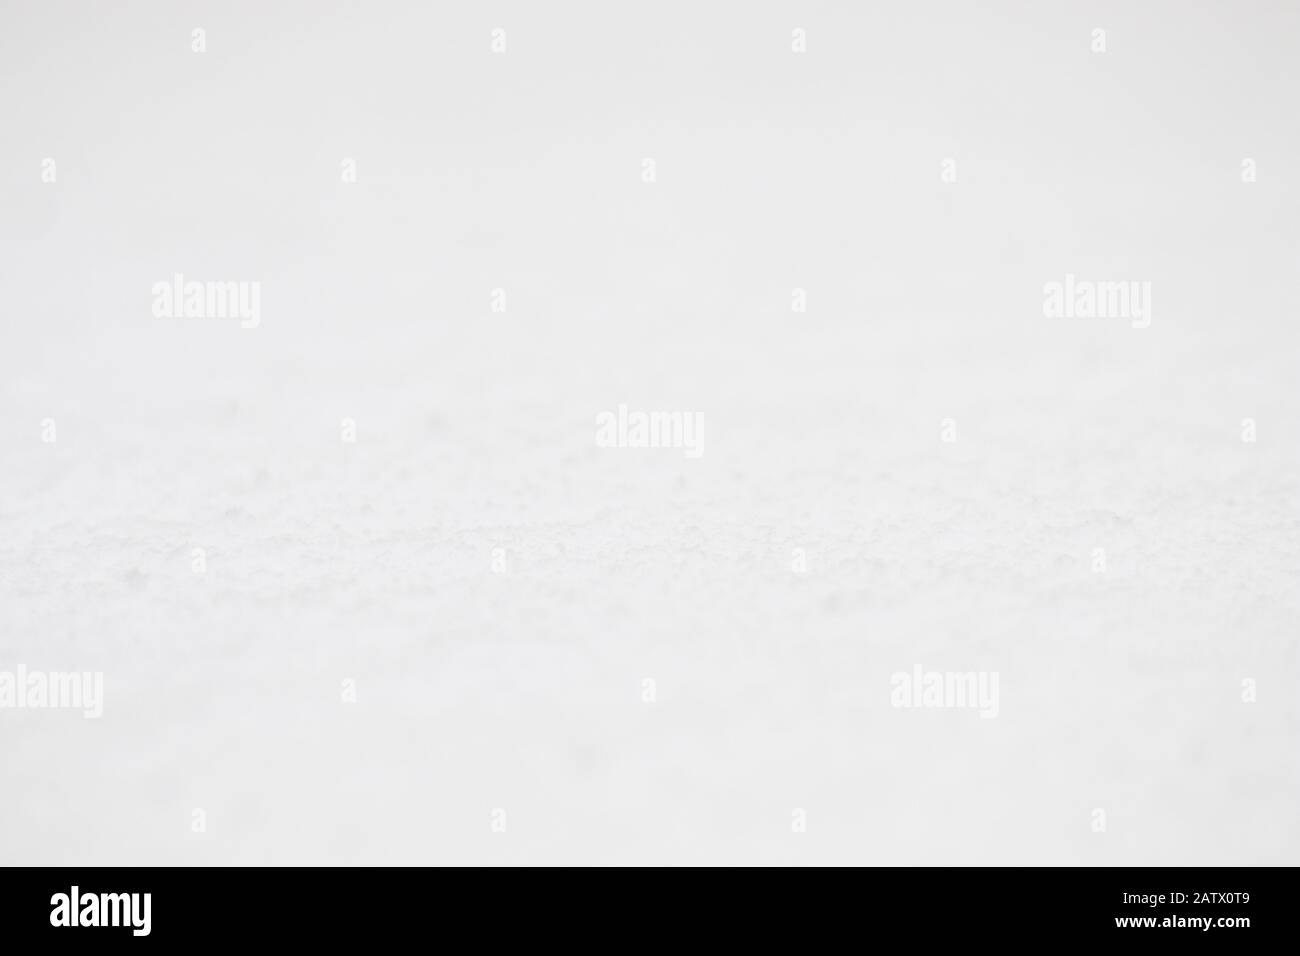 snow - close up view of the white snow texture, blurred background Stock Photo